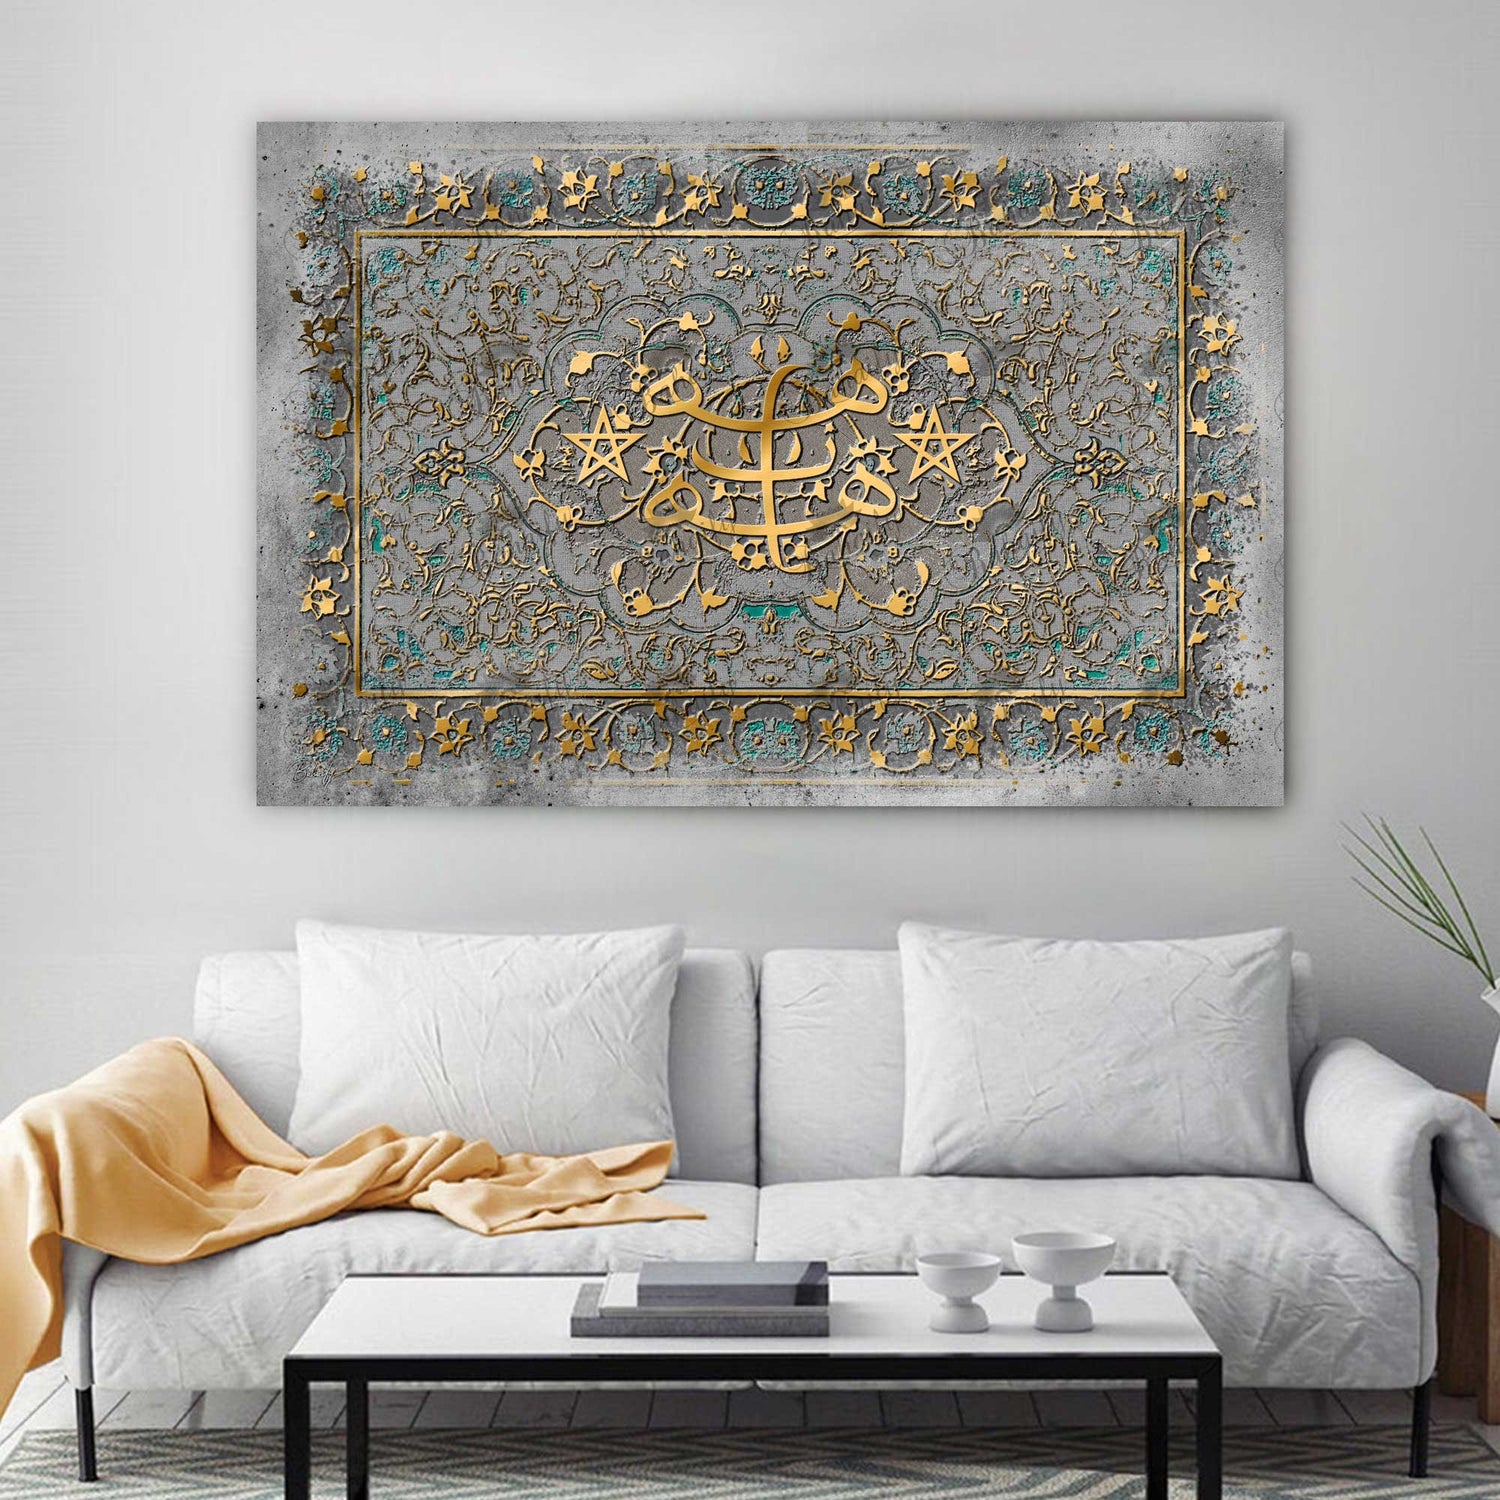 This canvas wall art showcases the Baha'i ringstone symbol, depicting interconnectedness and unity through two stars and overlapping circles. It embodies Baha'i principles of harmony, love, and unity, serving as a beautiful reminder for any home or office. The intricate calligraphy and design inspire a sense of oneness and connectedness with the universe.